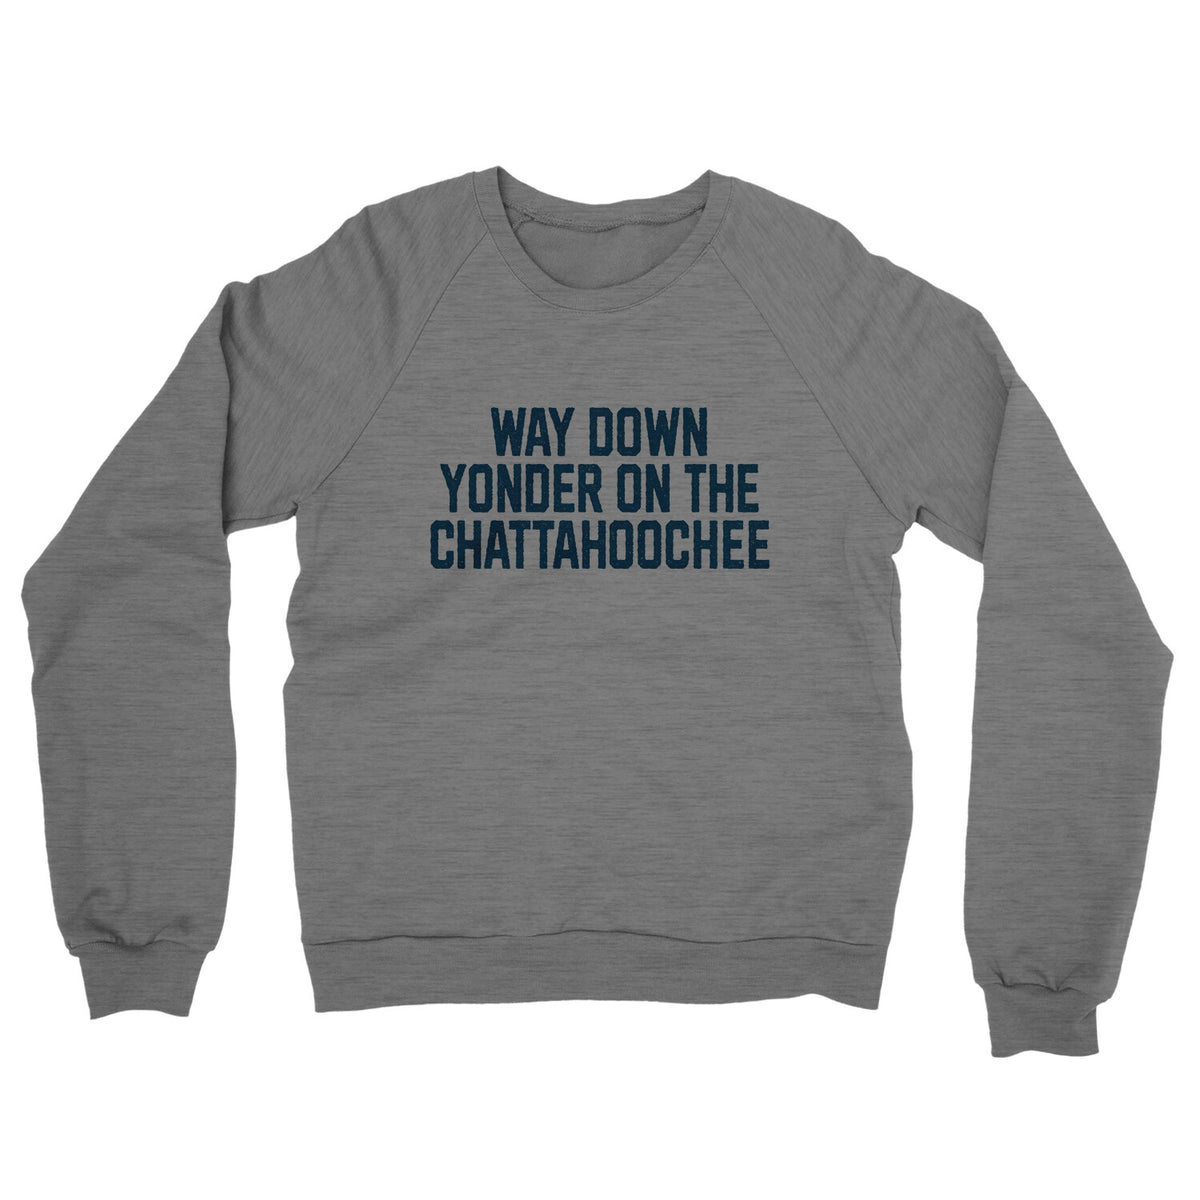 Way Down Yonder on the Chattahoochee in Graphite Heather Color